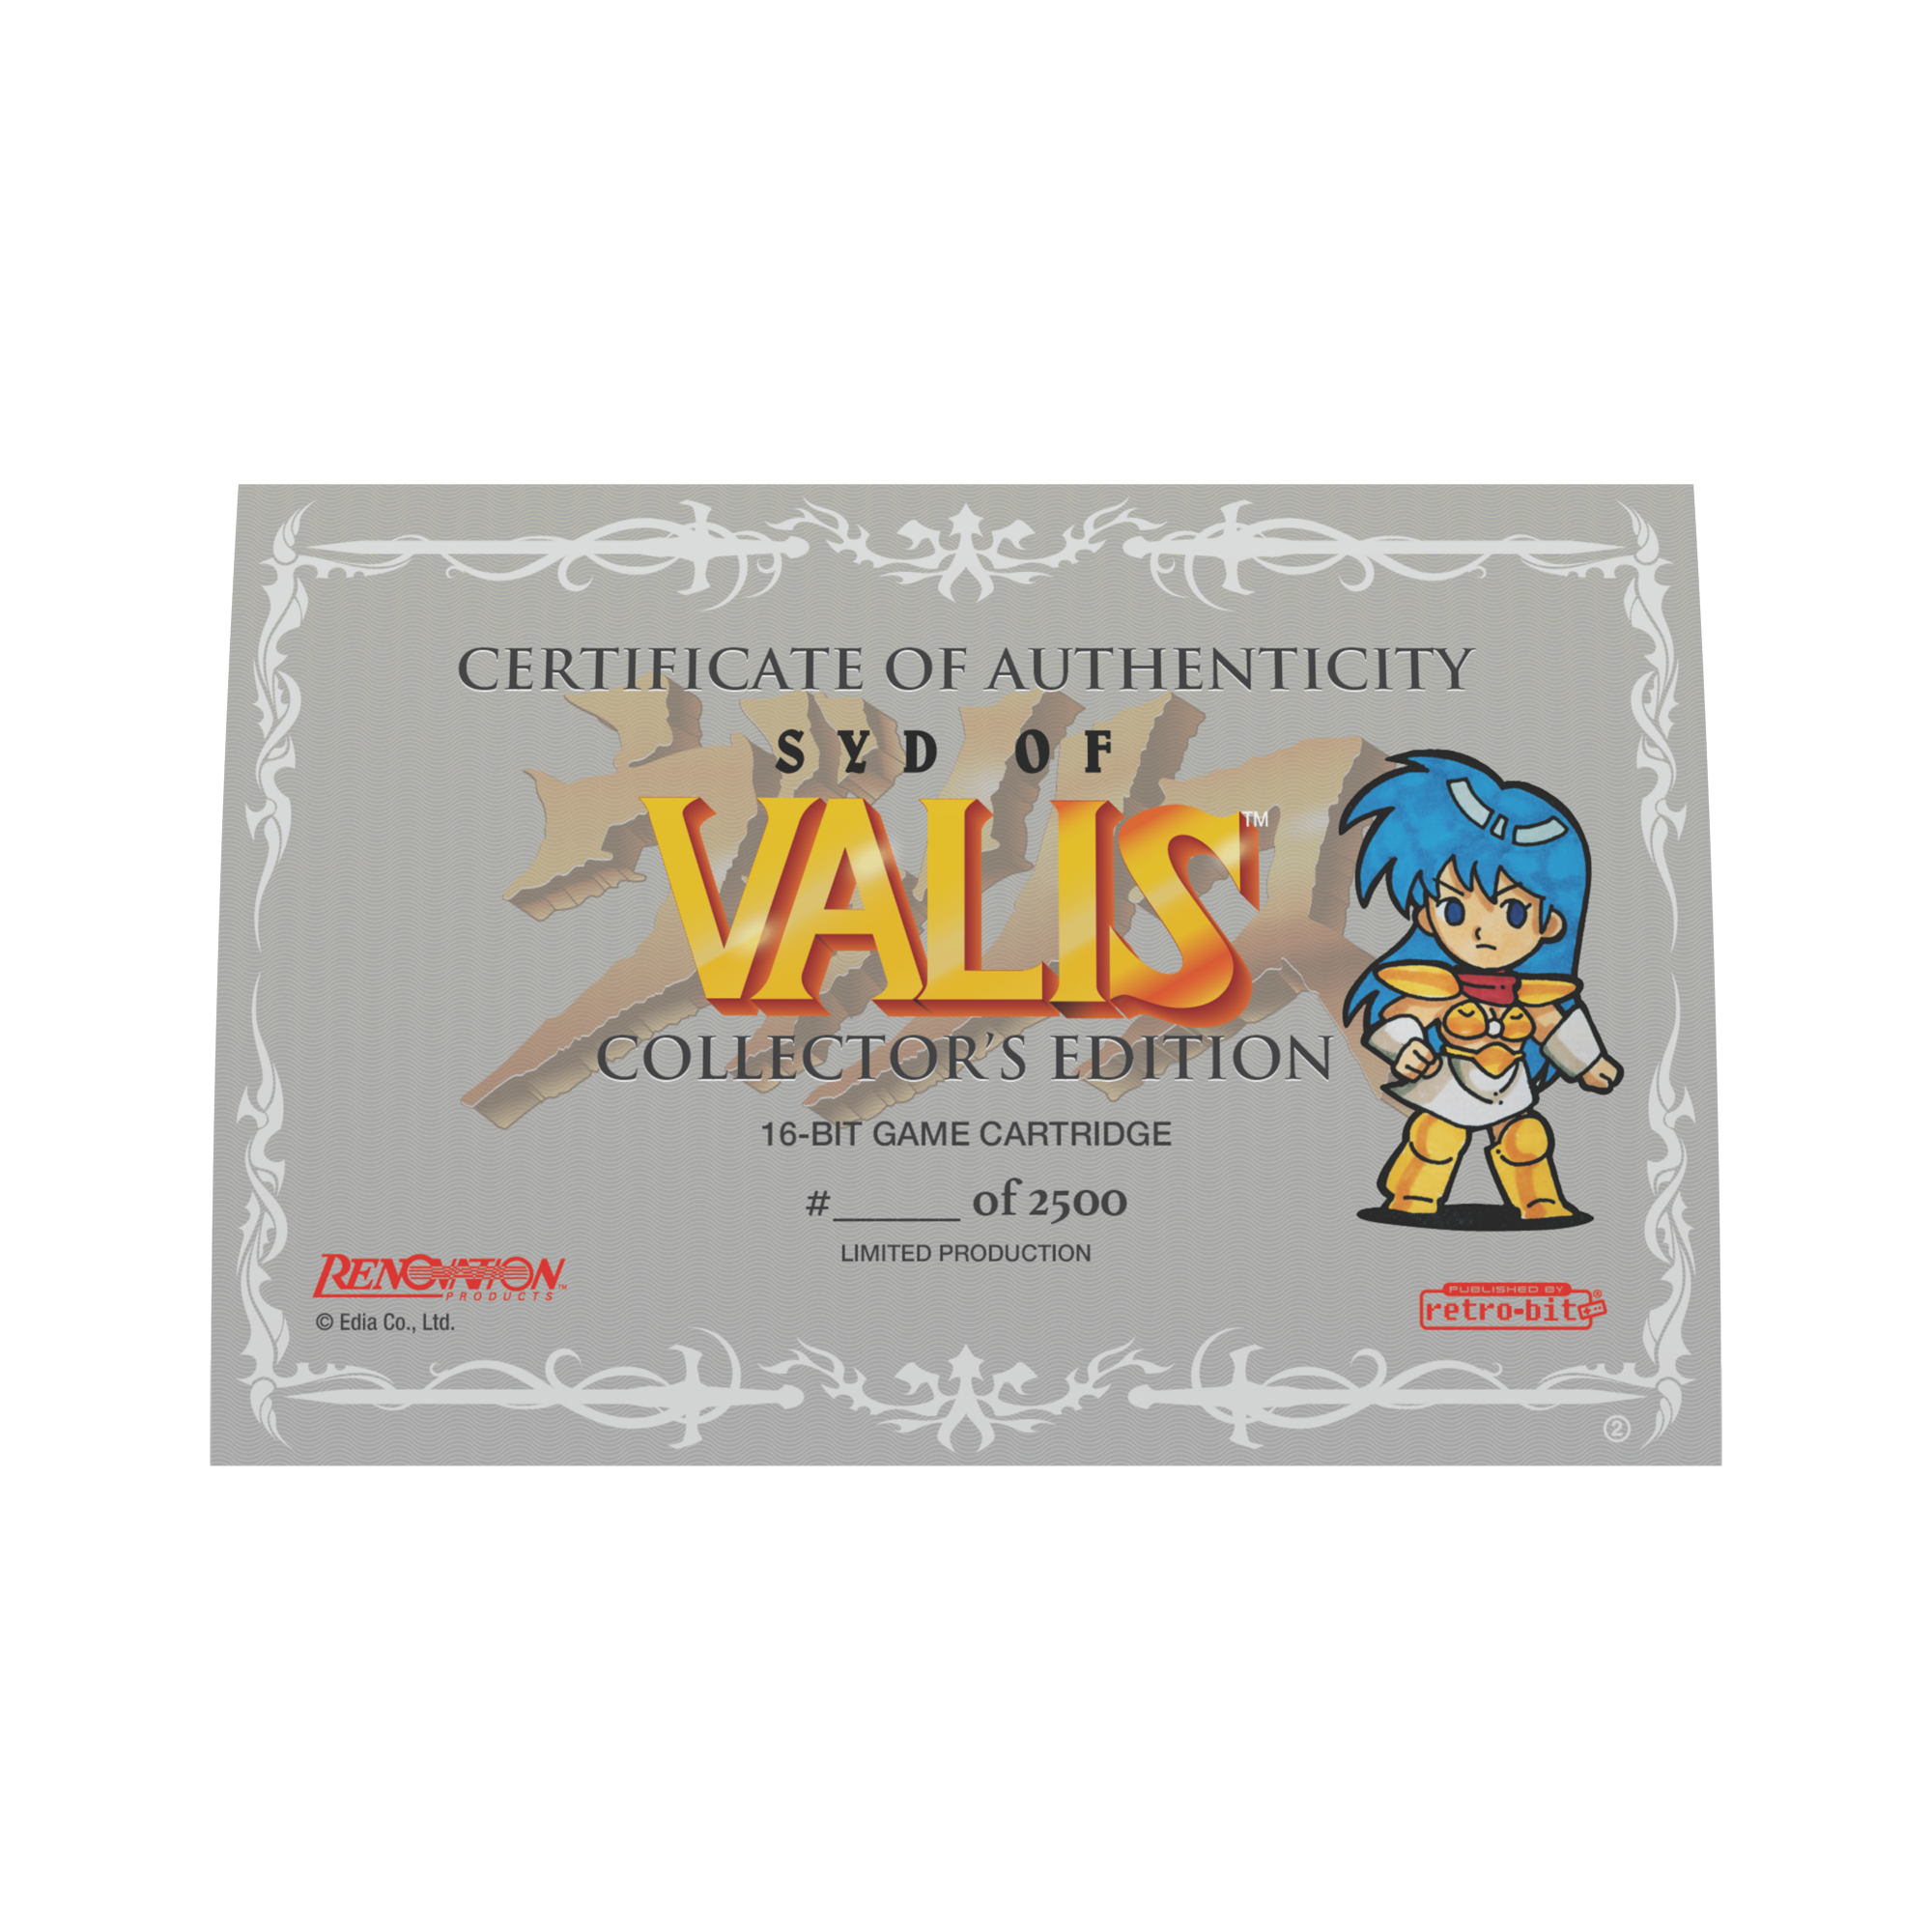 ValisCollectionPressKit Syd of Valis COA 00.png